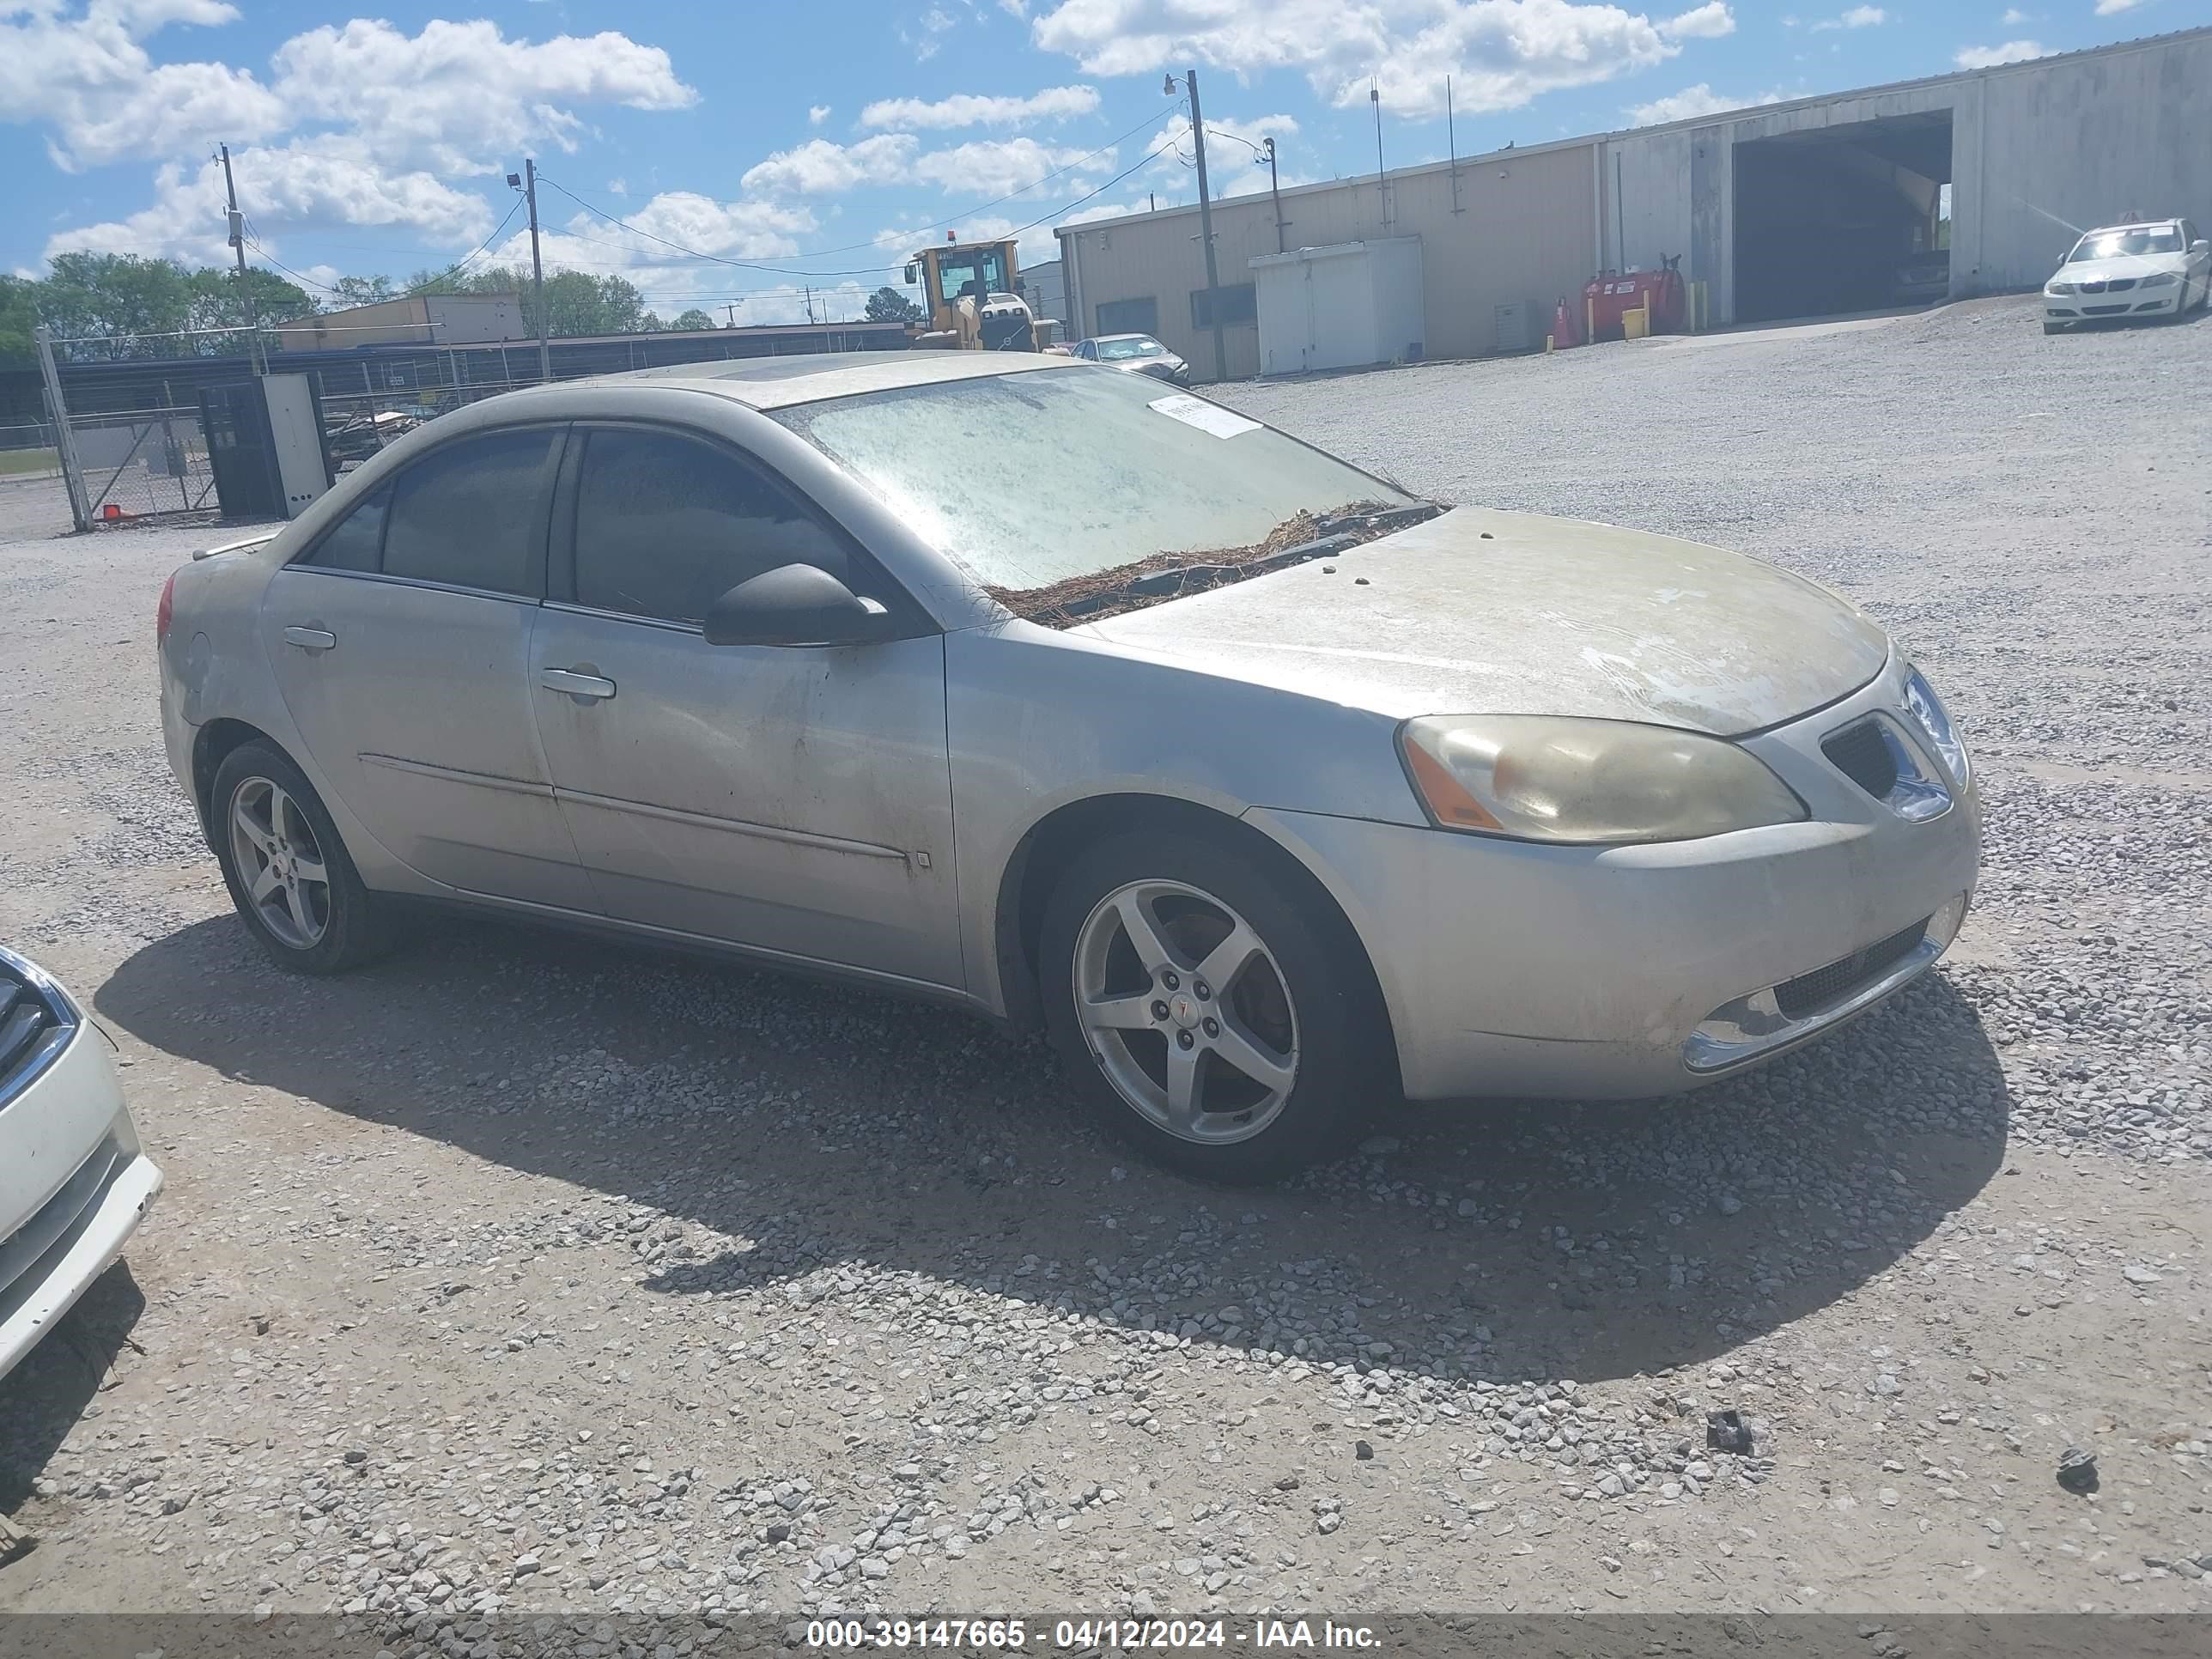 vin: 1G2ZG58N974269847 1G2ZG58N974269847 2007 pontiac g6 3500 for Sale in 37404, 2801 Asbury Park St, Chattanooga, Tennessee, USA